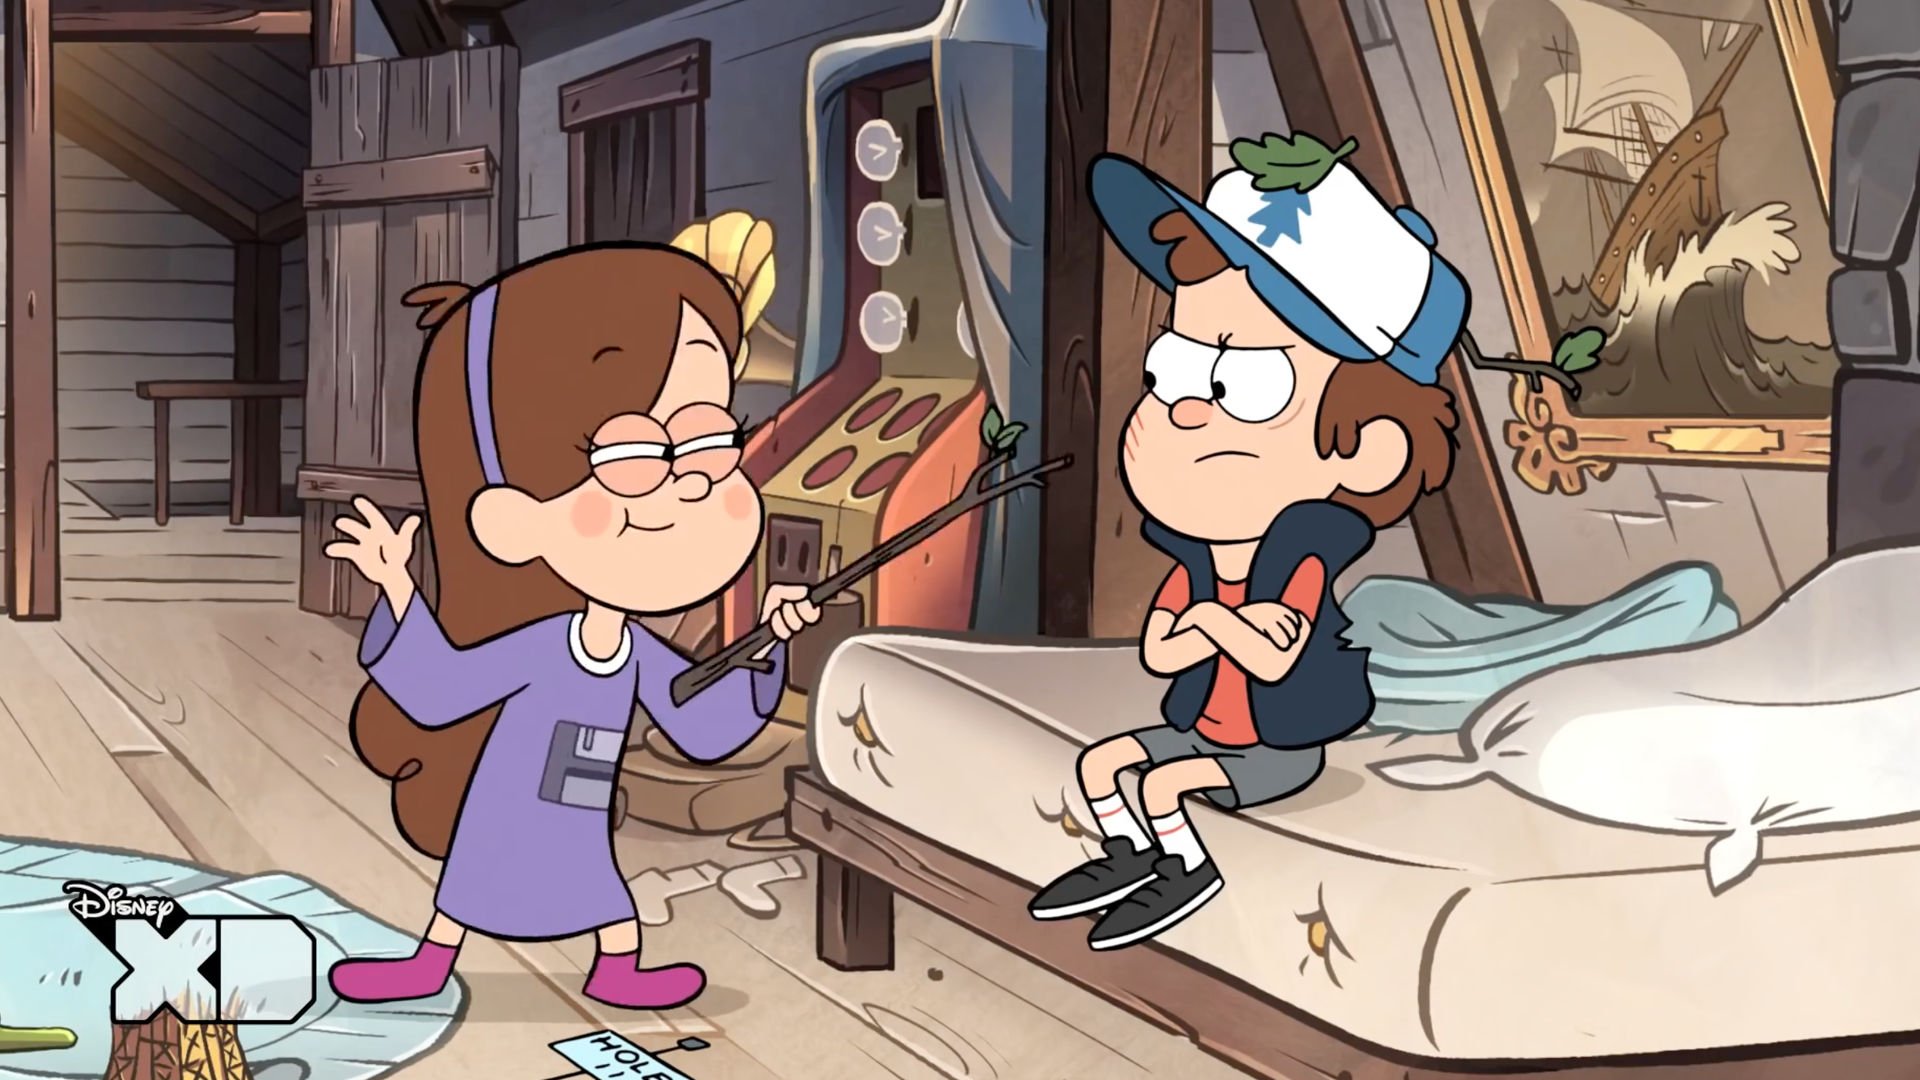 A scene from Gravity Falls